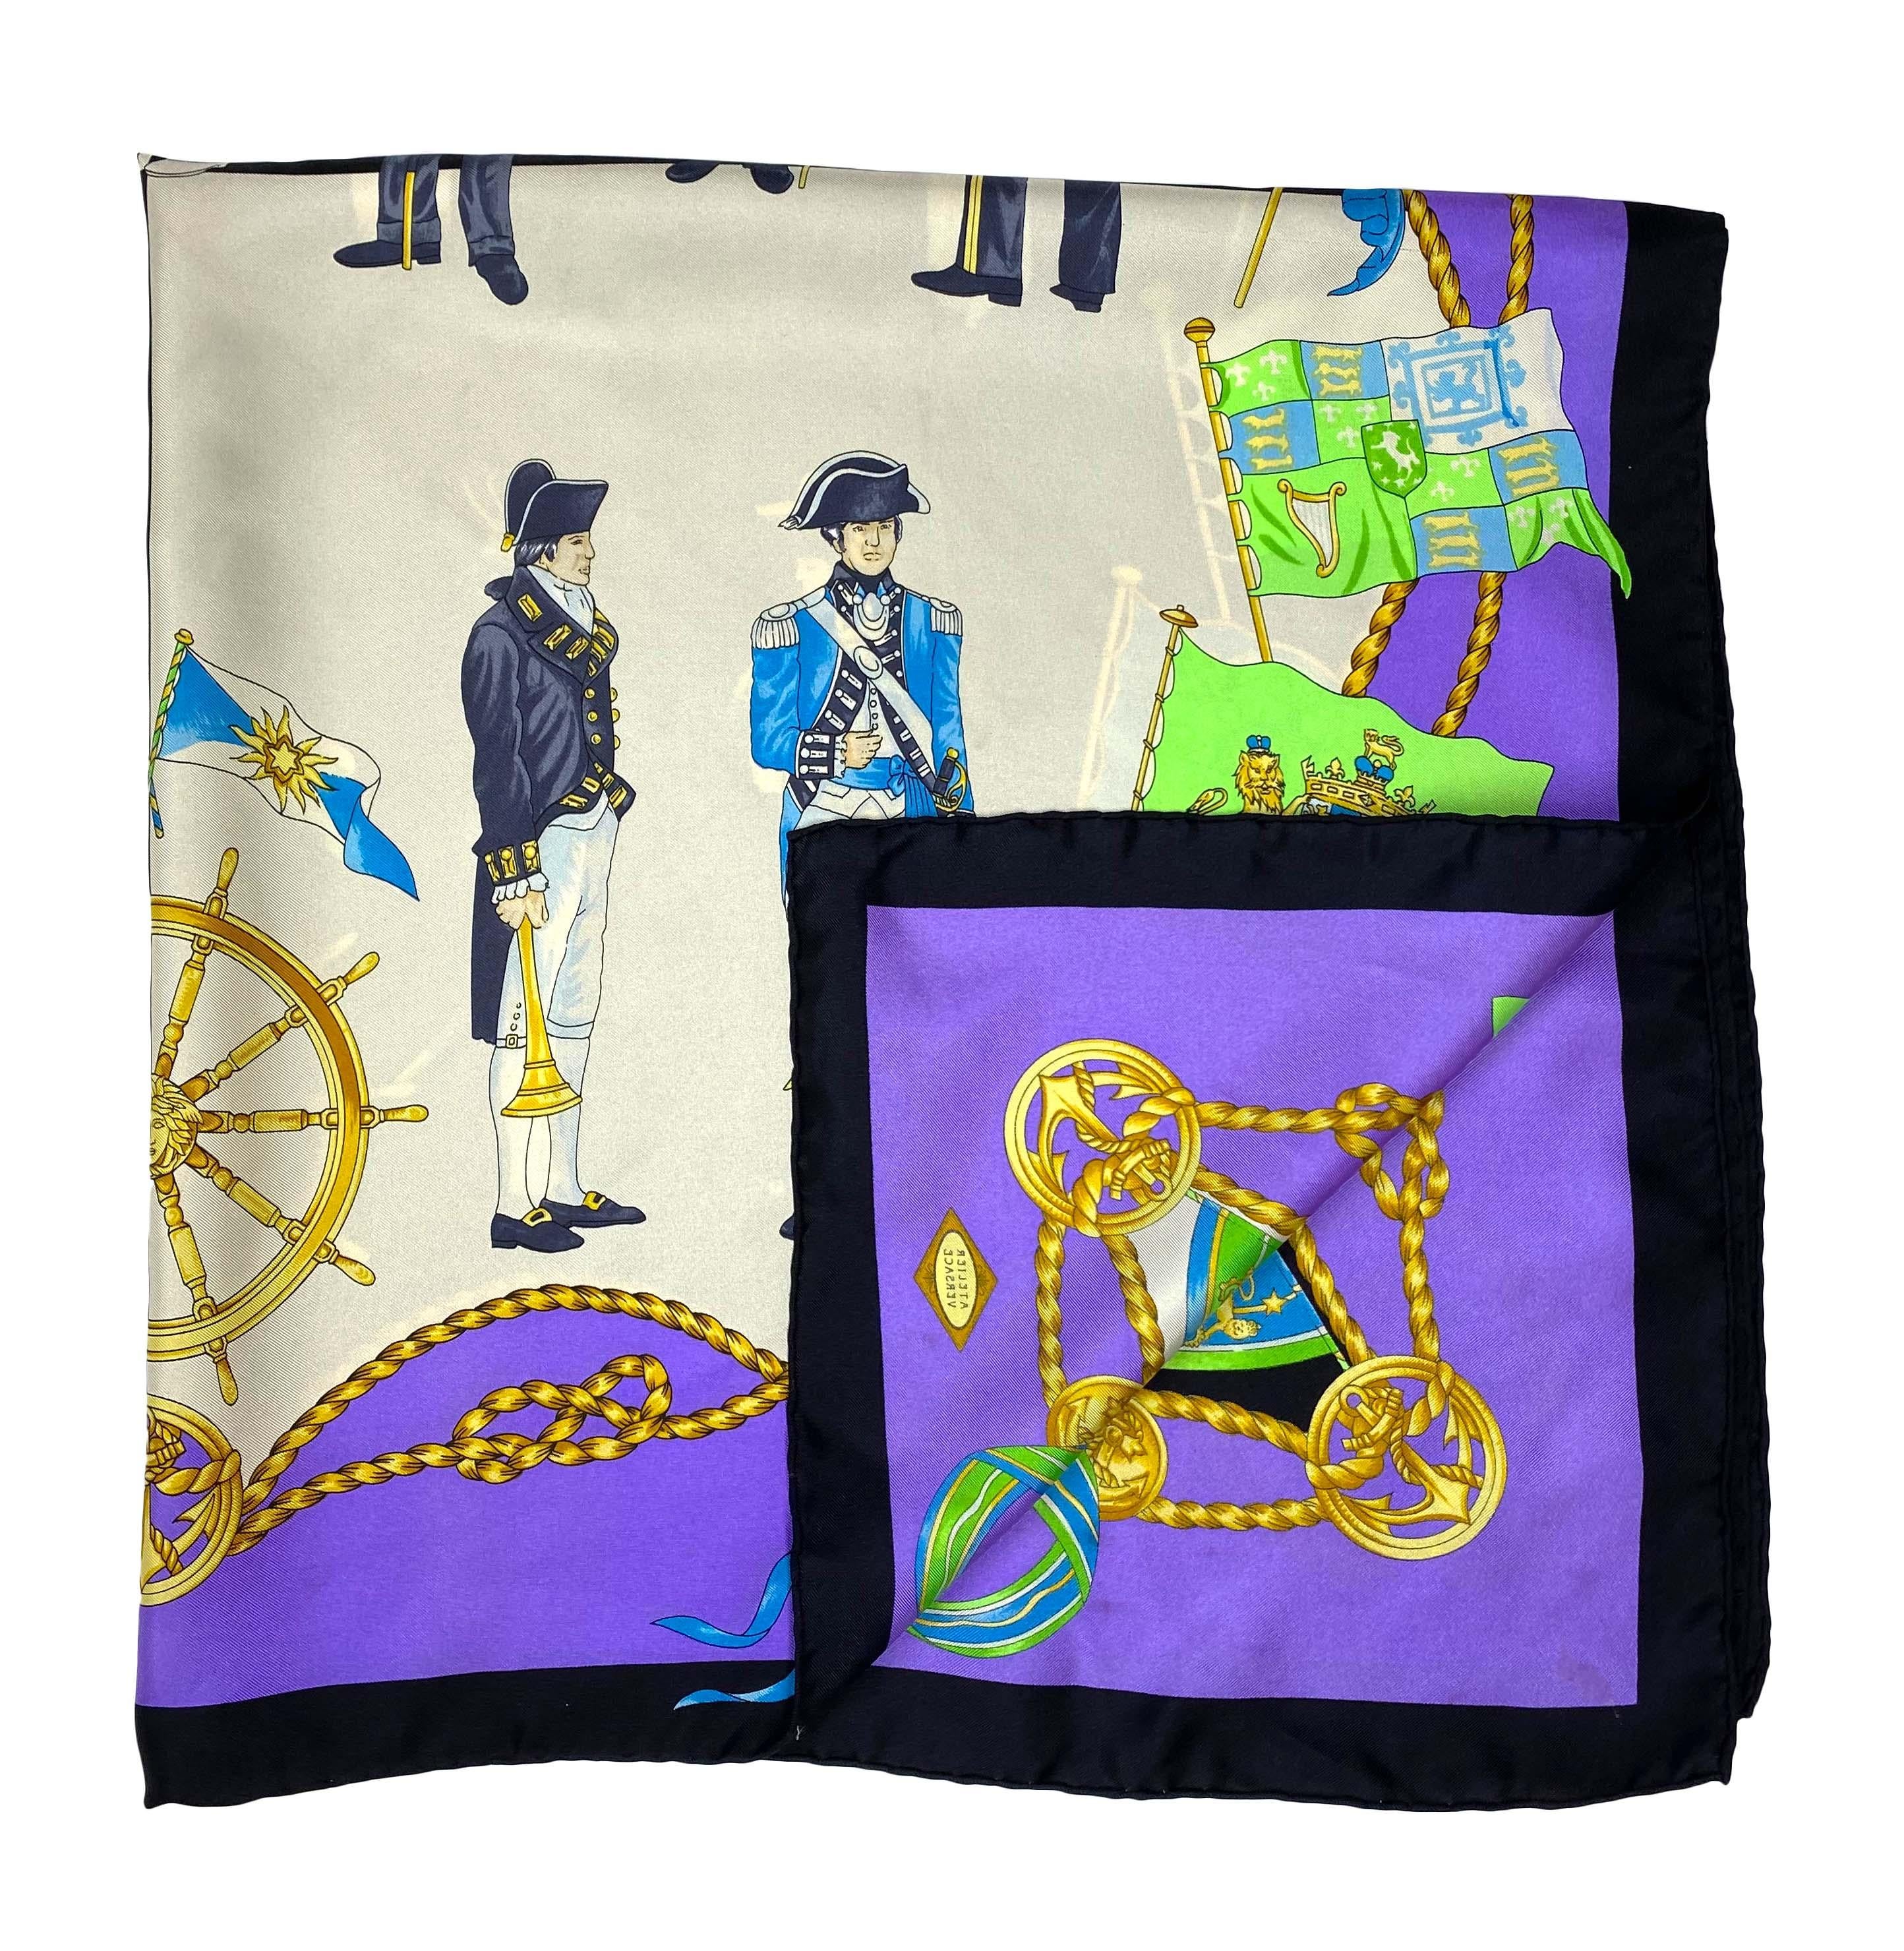 Presenting a nautical motif Atelier Versace scarf, designed by Gianni Versace. With a bright purple border, this scarf depicts naval seamen from different eras. Truly a work of art, this bright and lively scarf adds the perfect pop of color to any